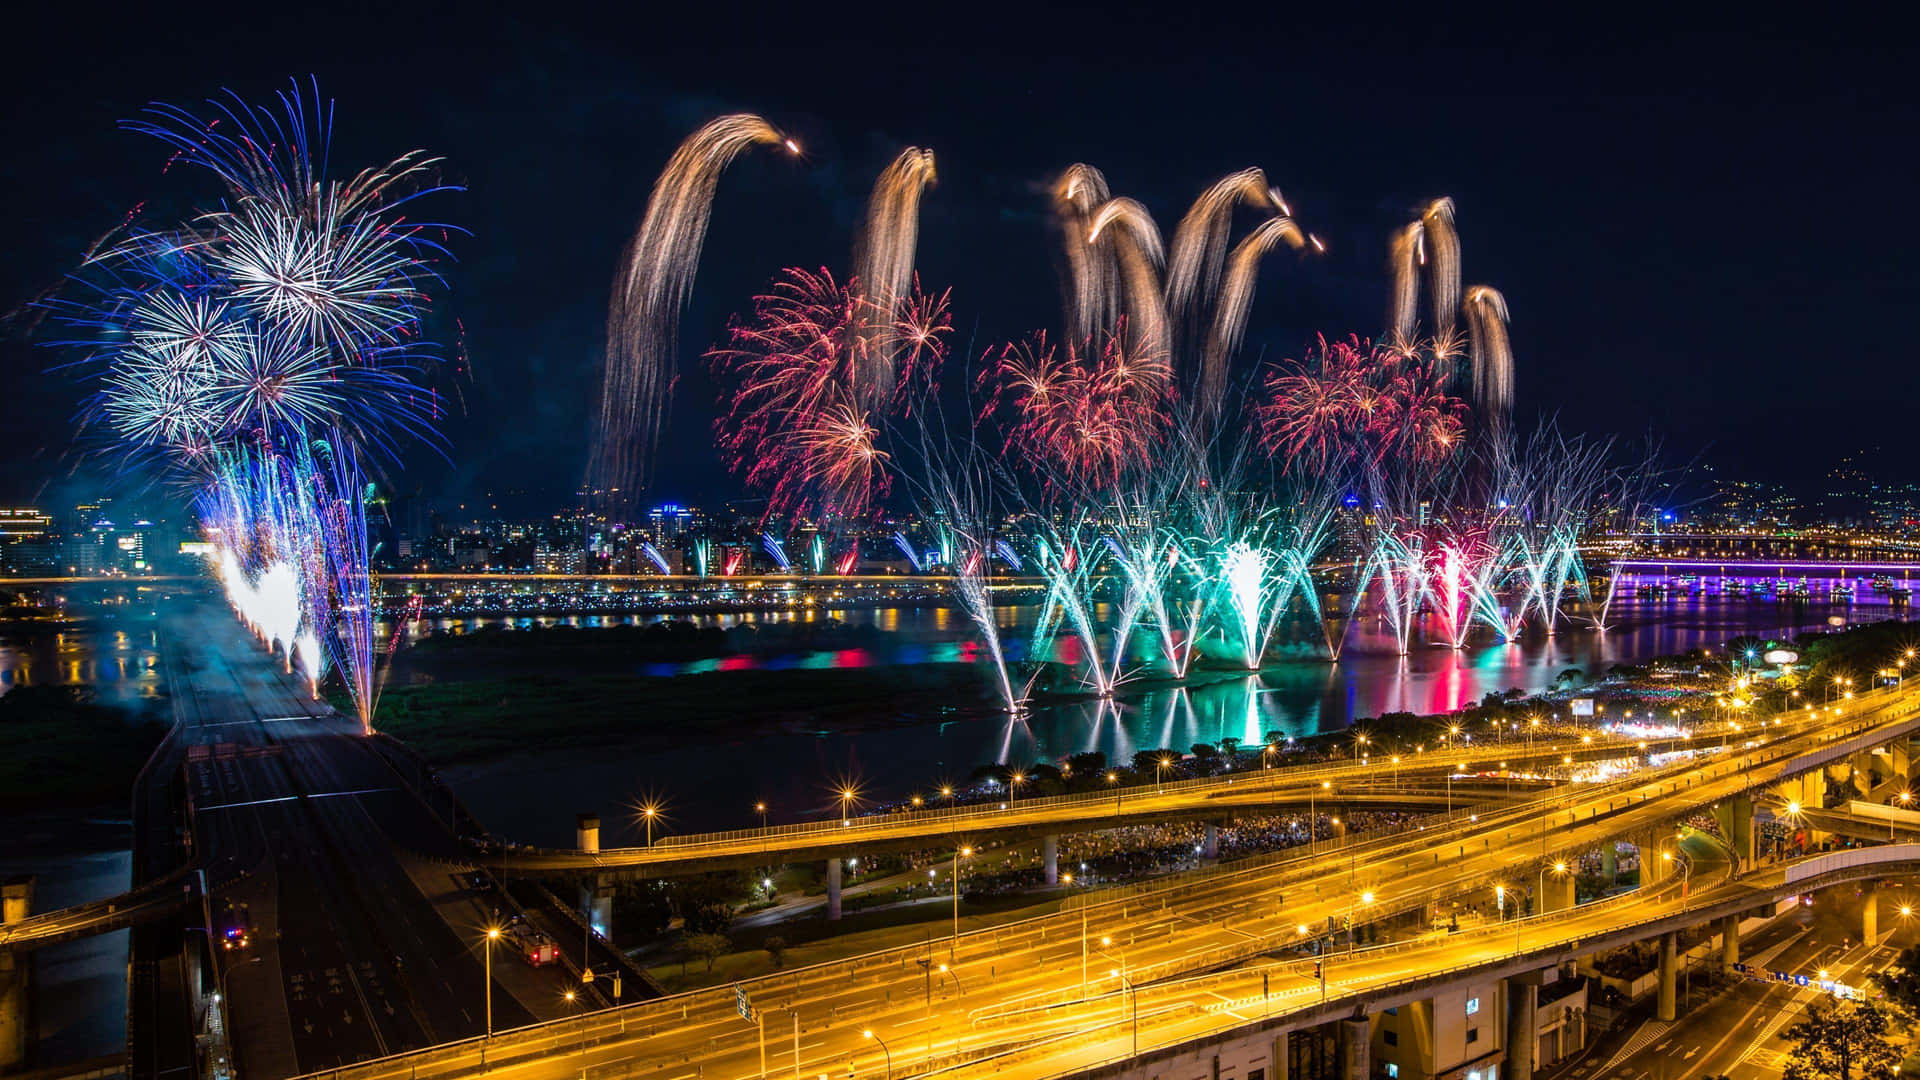 Fireworks Are Being Lit Up Over A Bridge